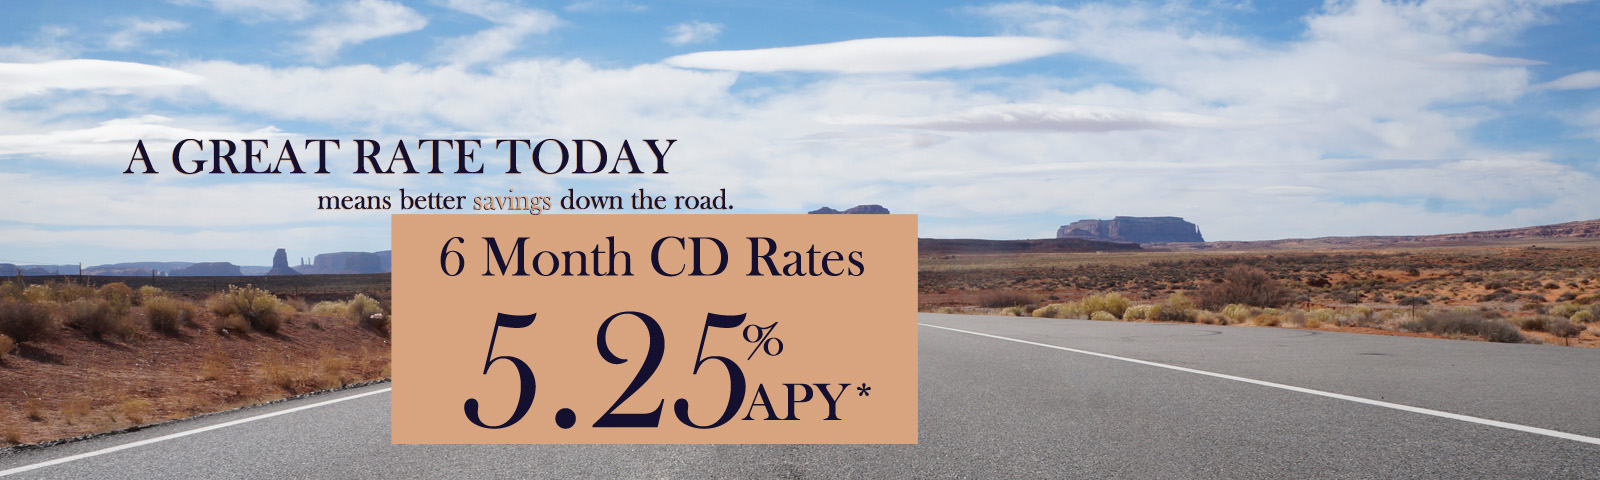 A great rate today means better savings down the road. 6 Month CD Rates at 5.25% APY*